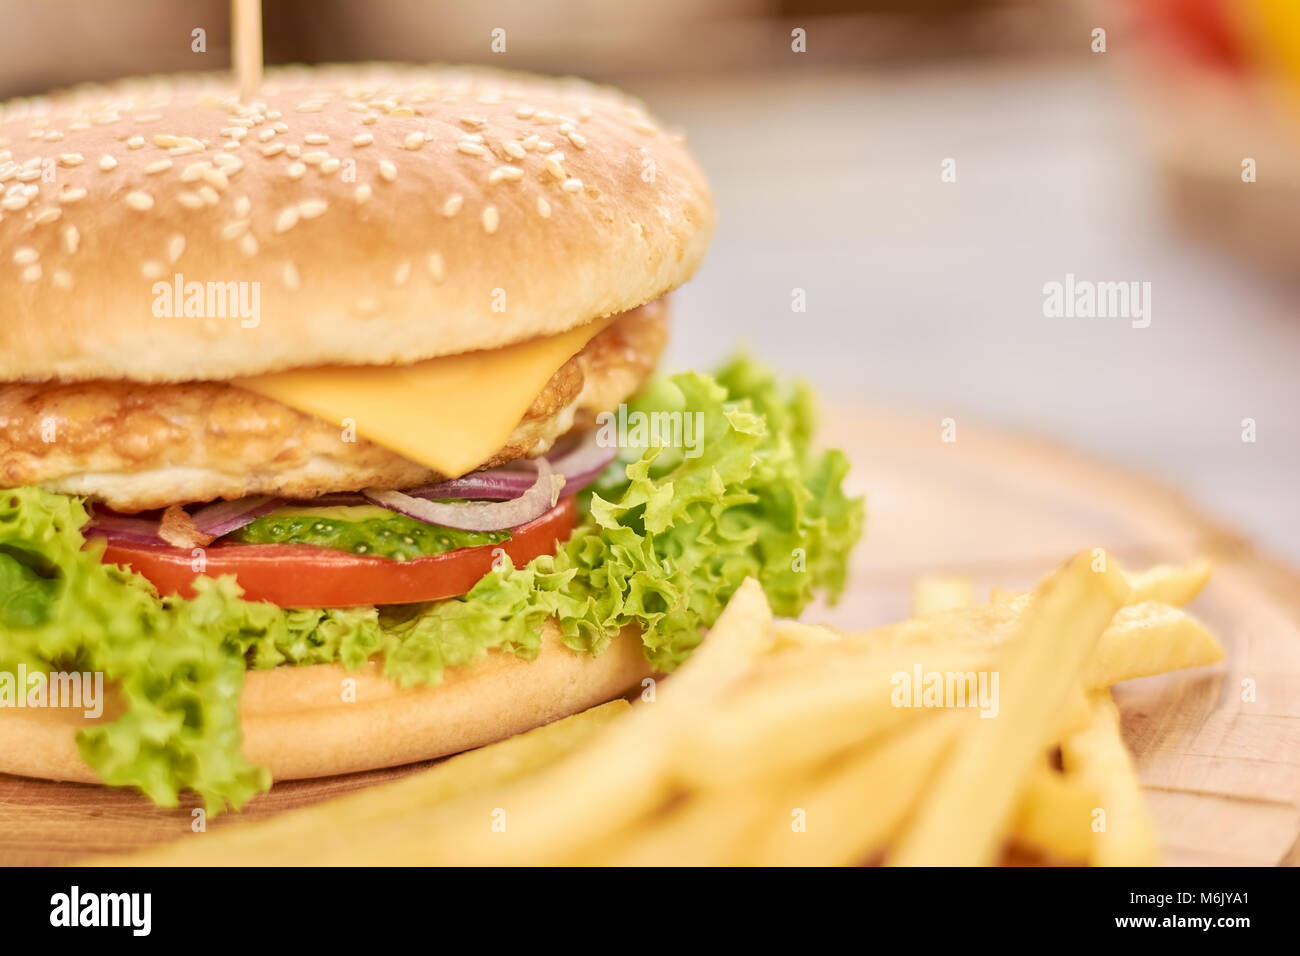 Burger made from fresh vegetables and chicken. Stock Photo